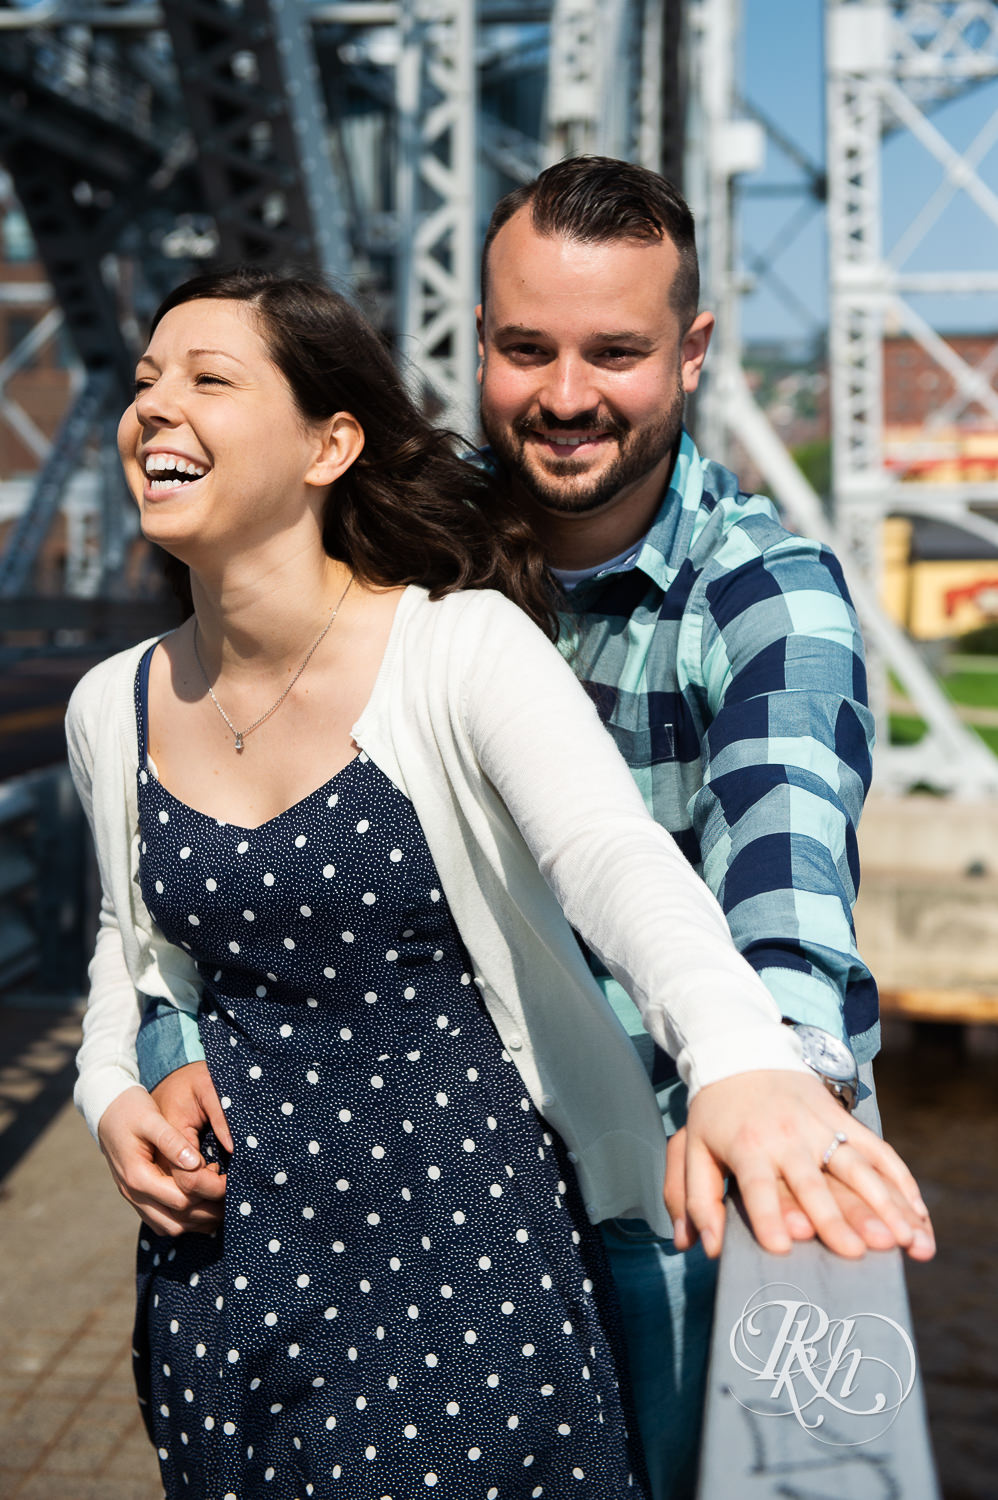 Man and woman laugh in Canal Park in Duluth, Minnesota.